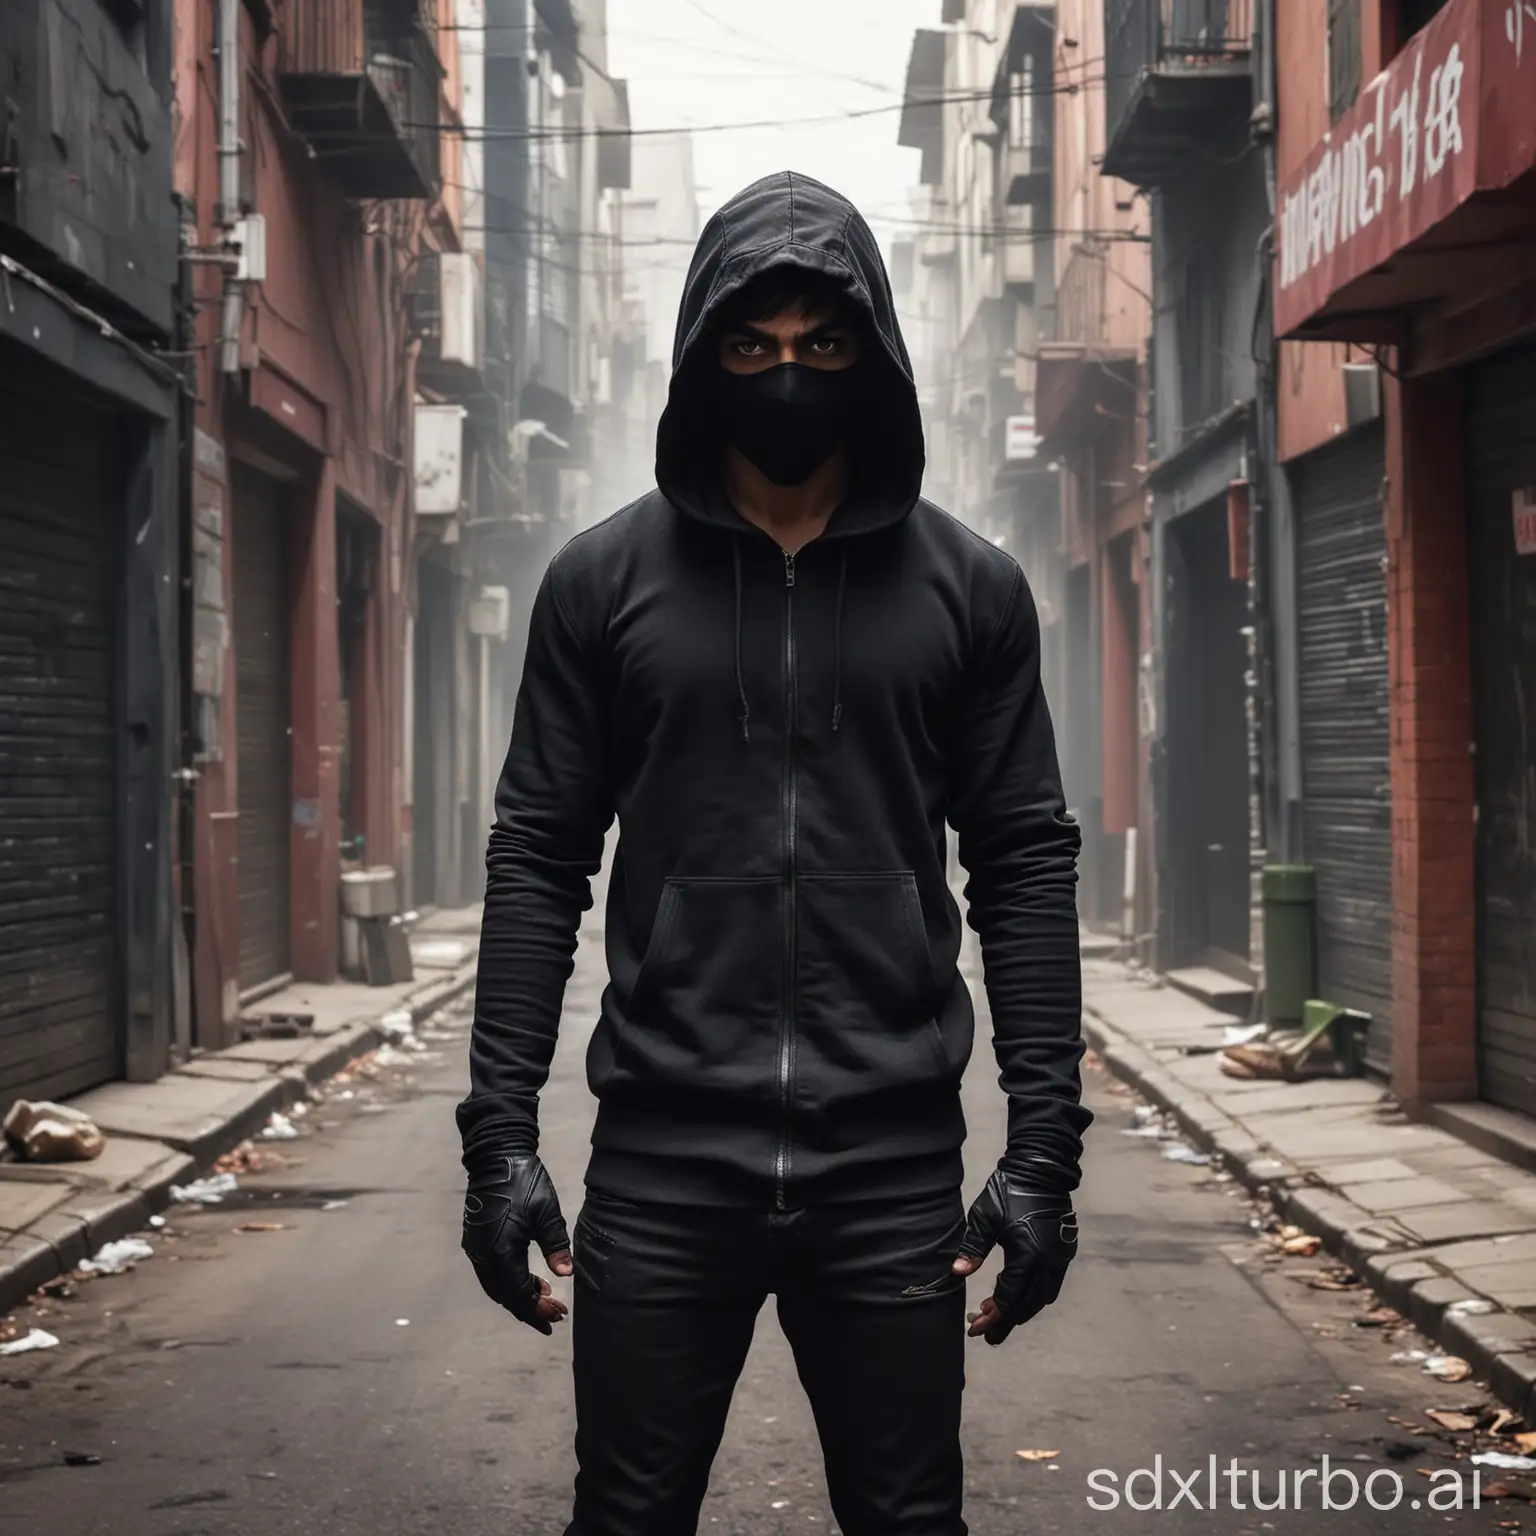 Mysterious-Fighter-in-Devil-Mask-on-Urban-Street